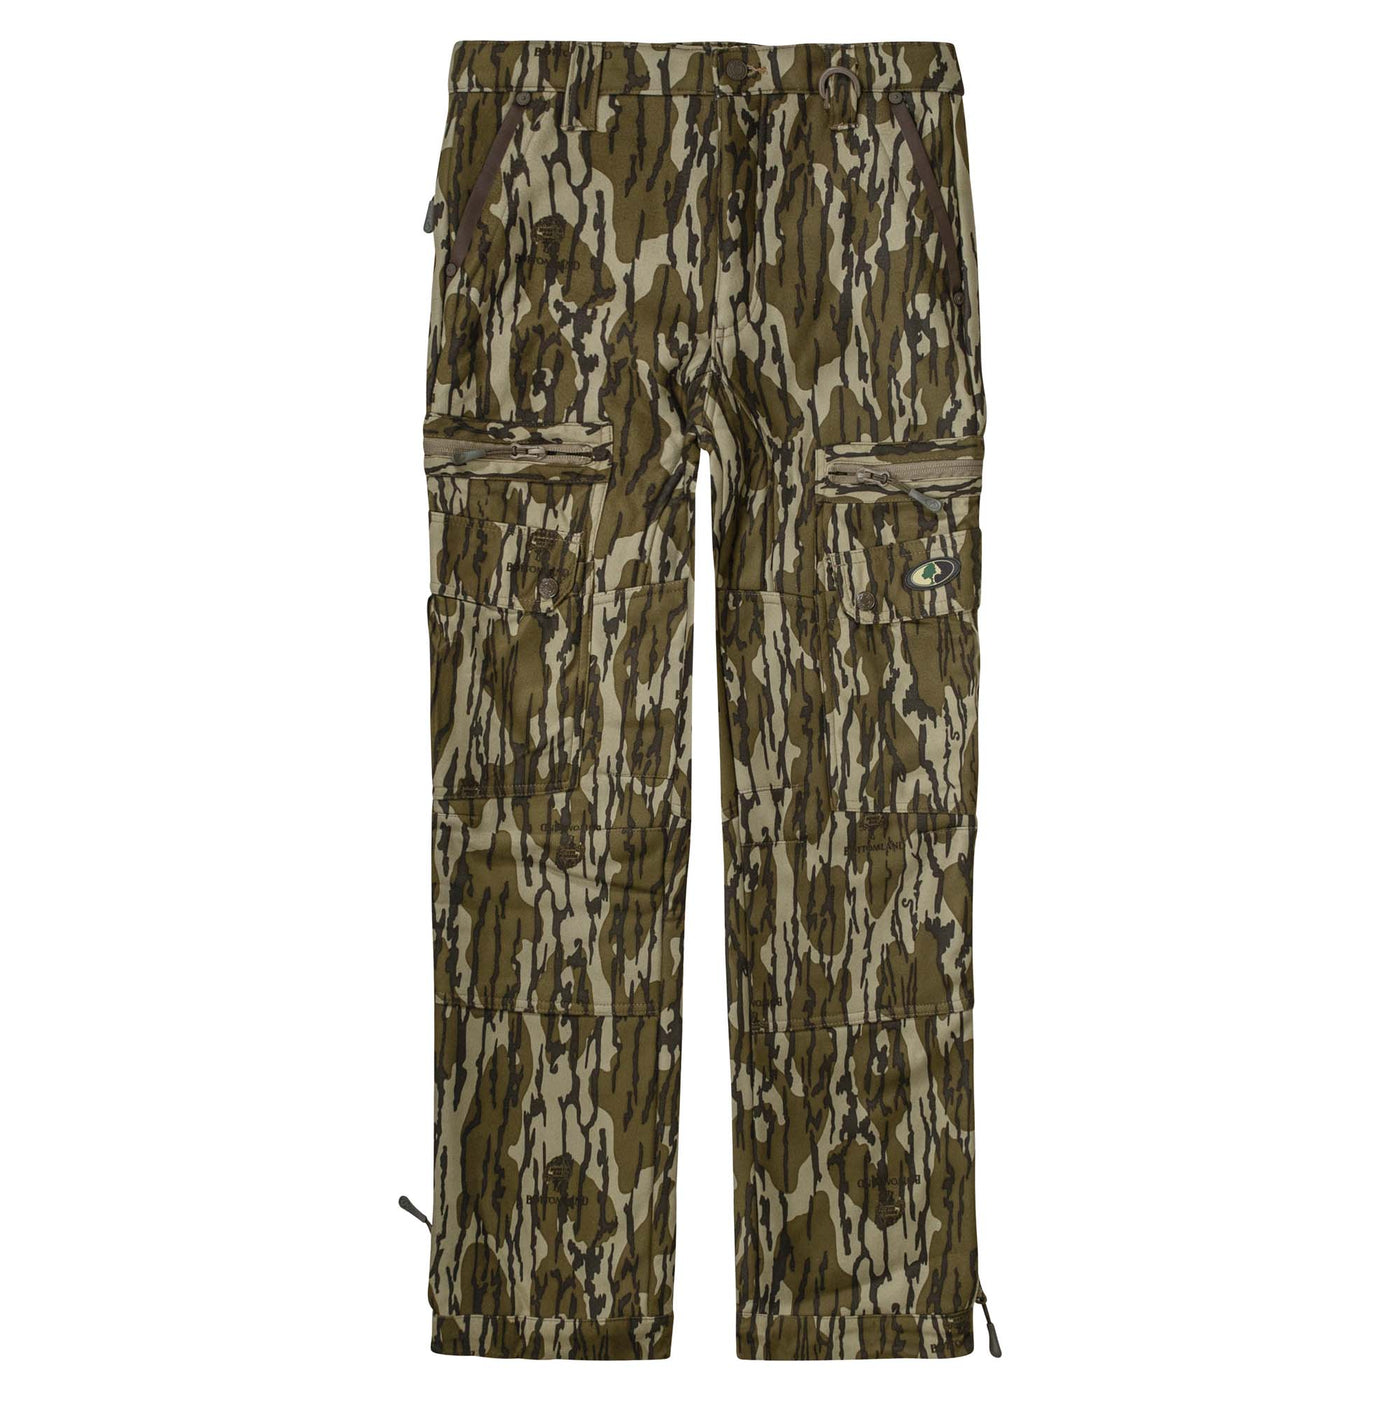  Mossy Oak Camo Lightweight Hunting Pants for Men Camouflage  Clothing, Small, Bottomland : Clothing, Shoes & Jewelry